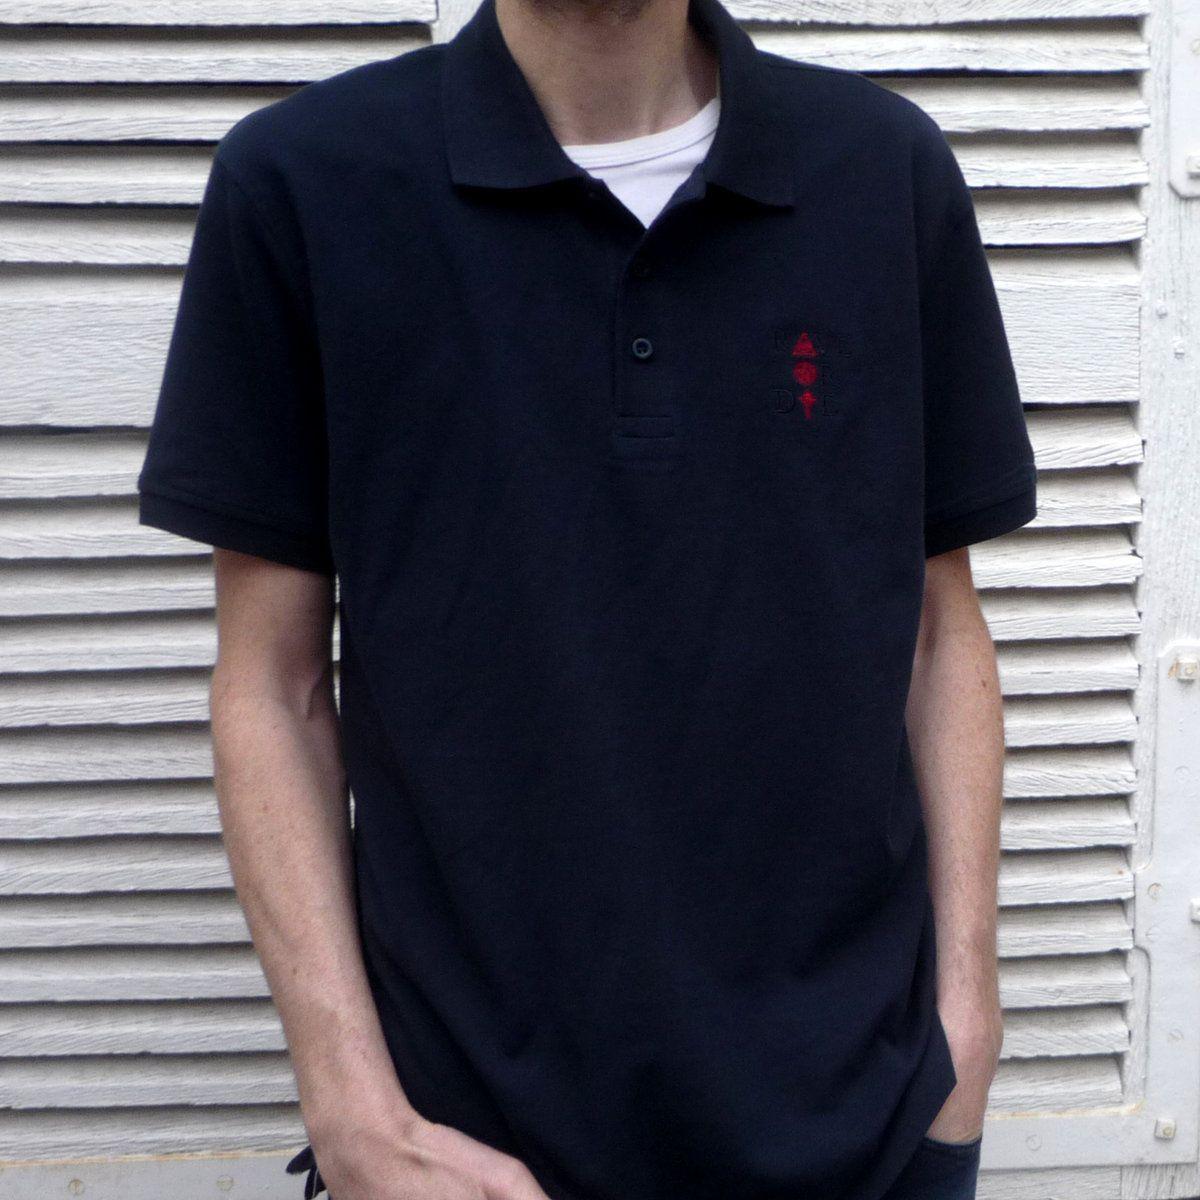 Blue with Red Polo Logo - Rave Or Die Polo Blue Navy & Red embroidered